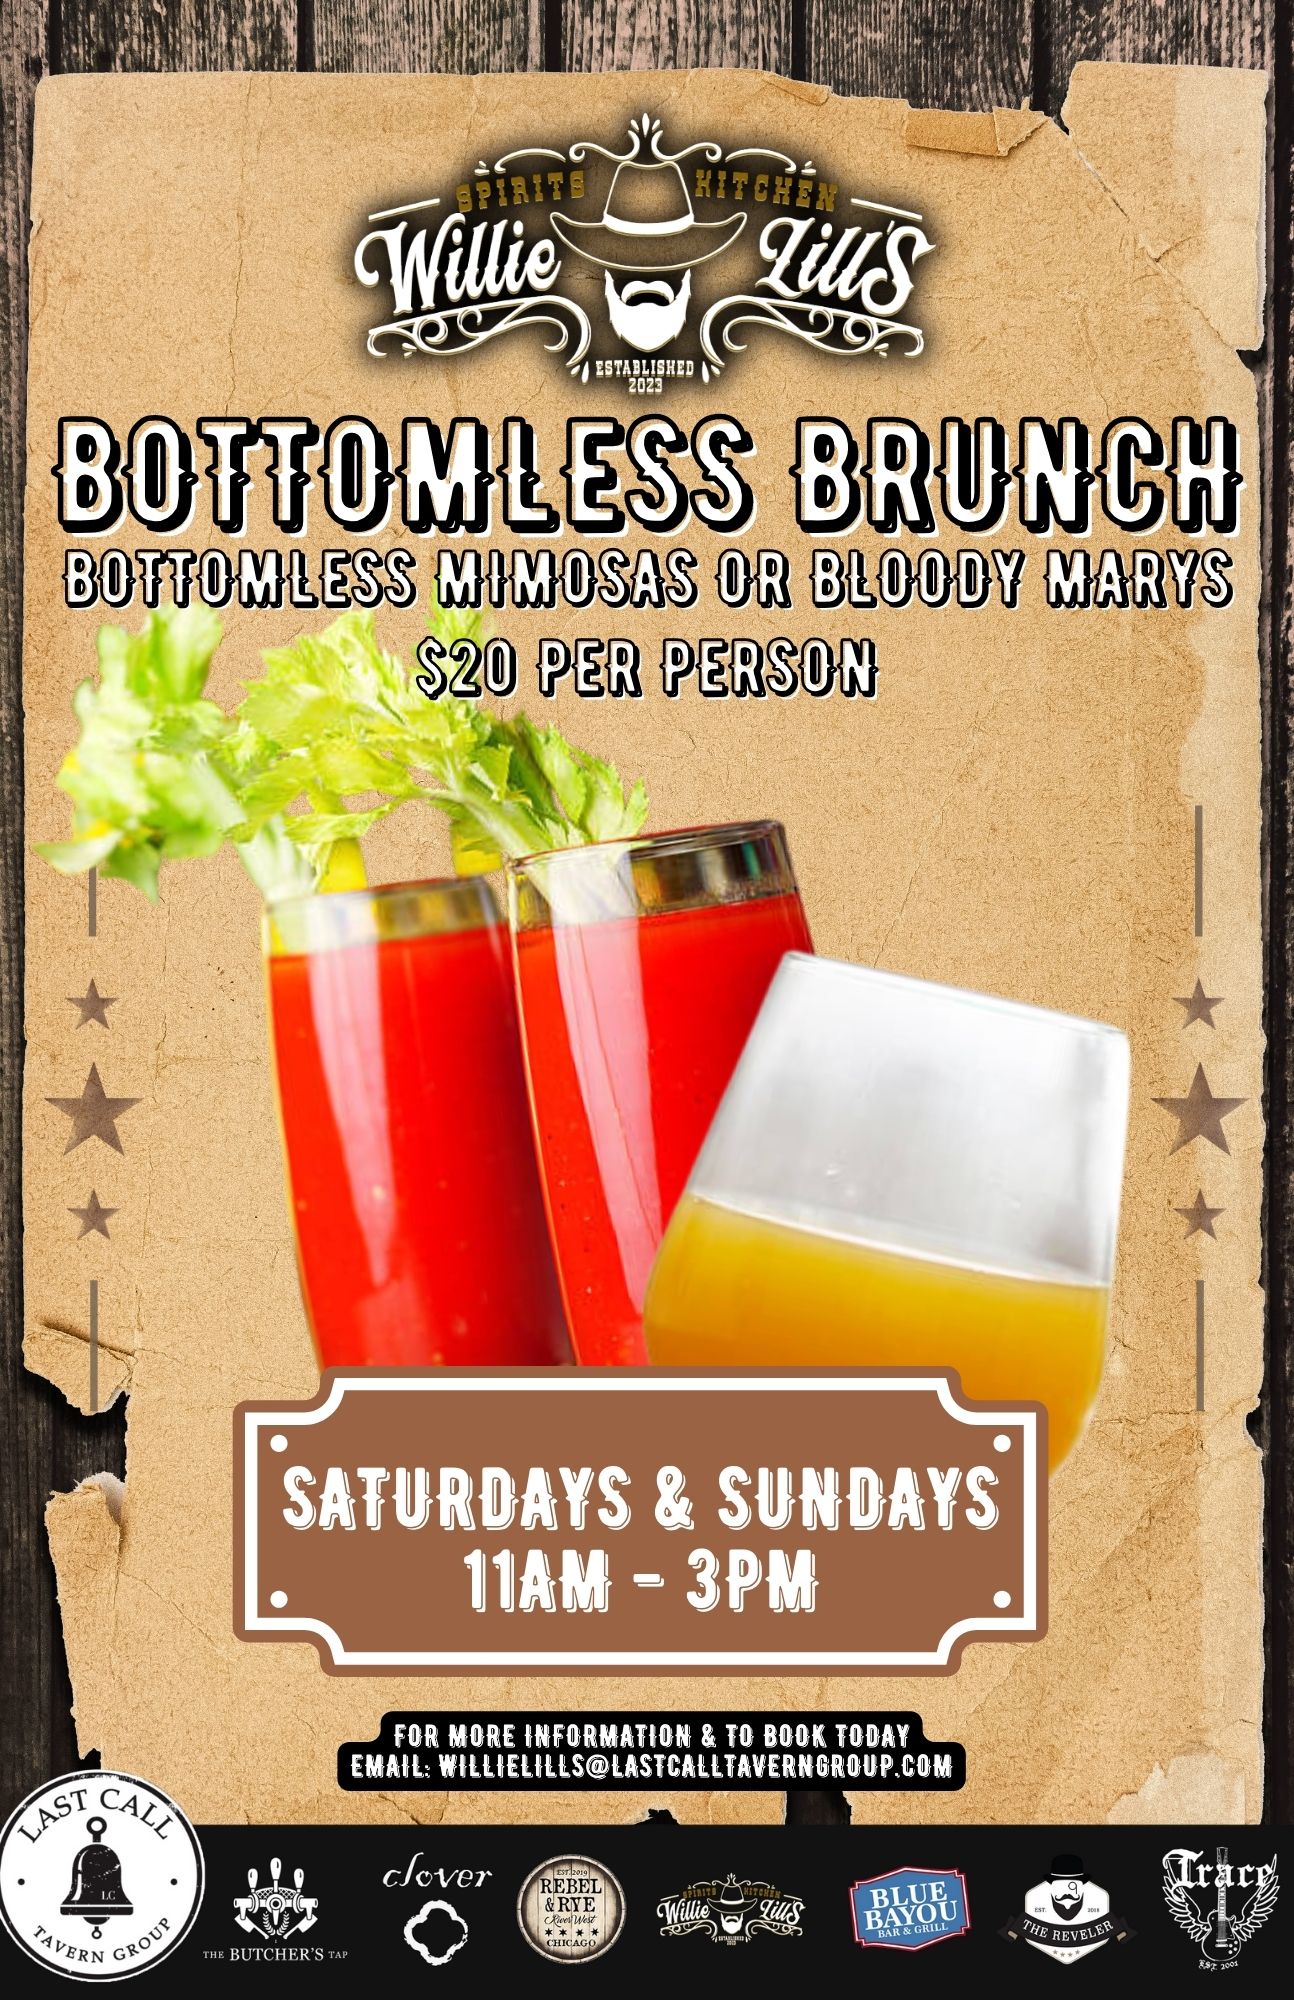 Wille Lill's Bottomless Brunch